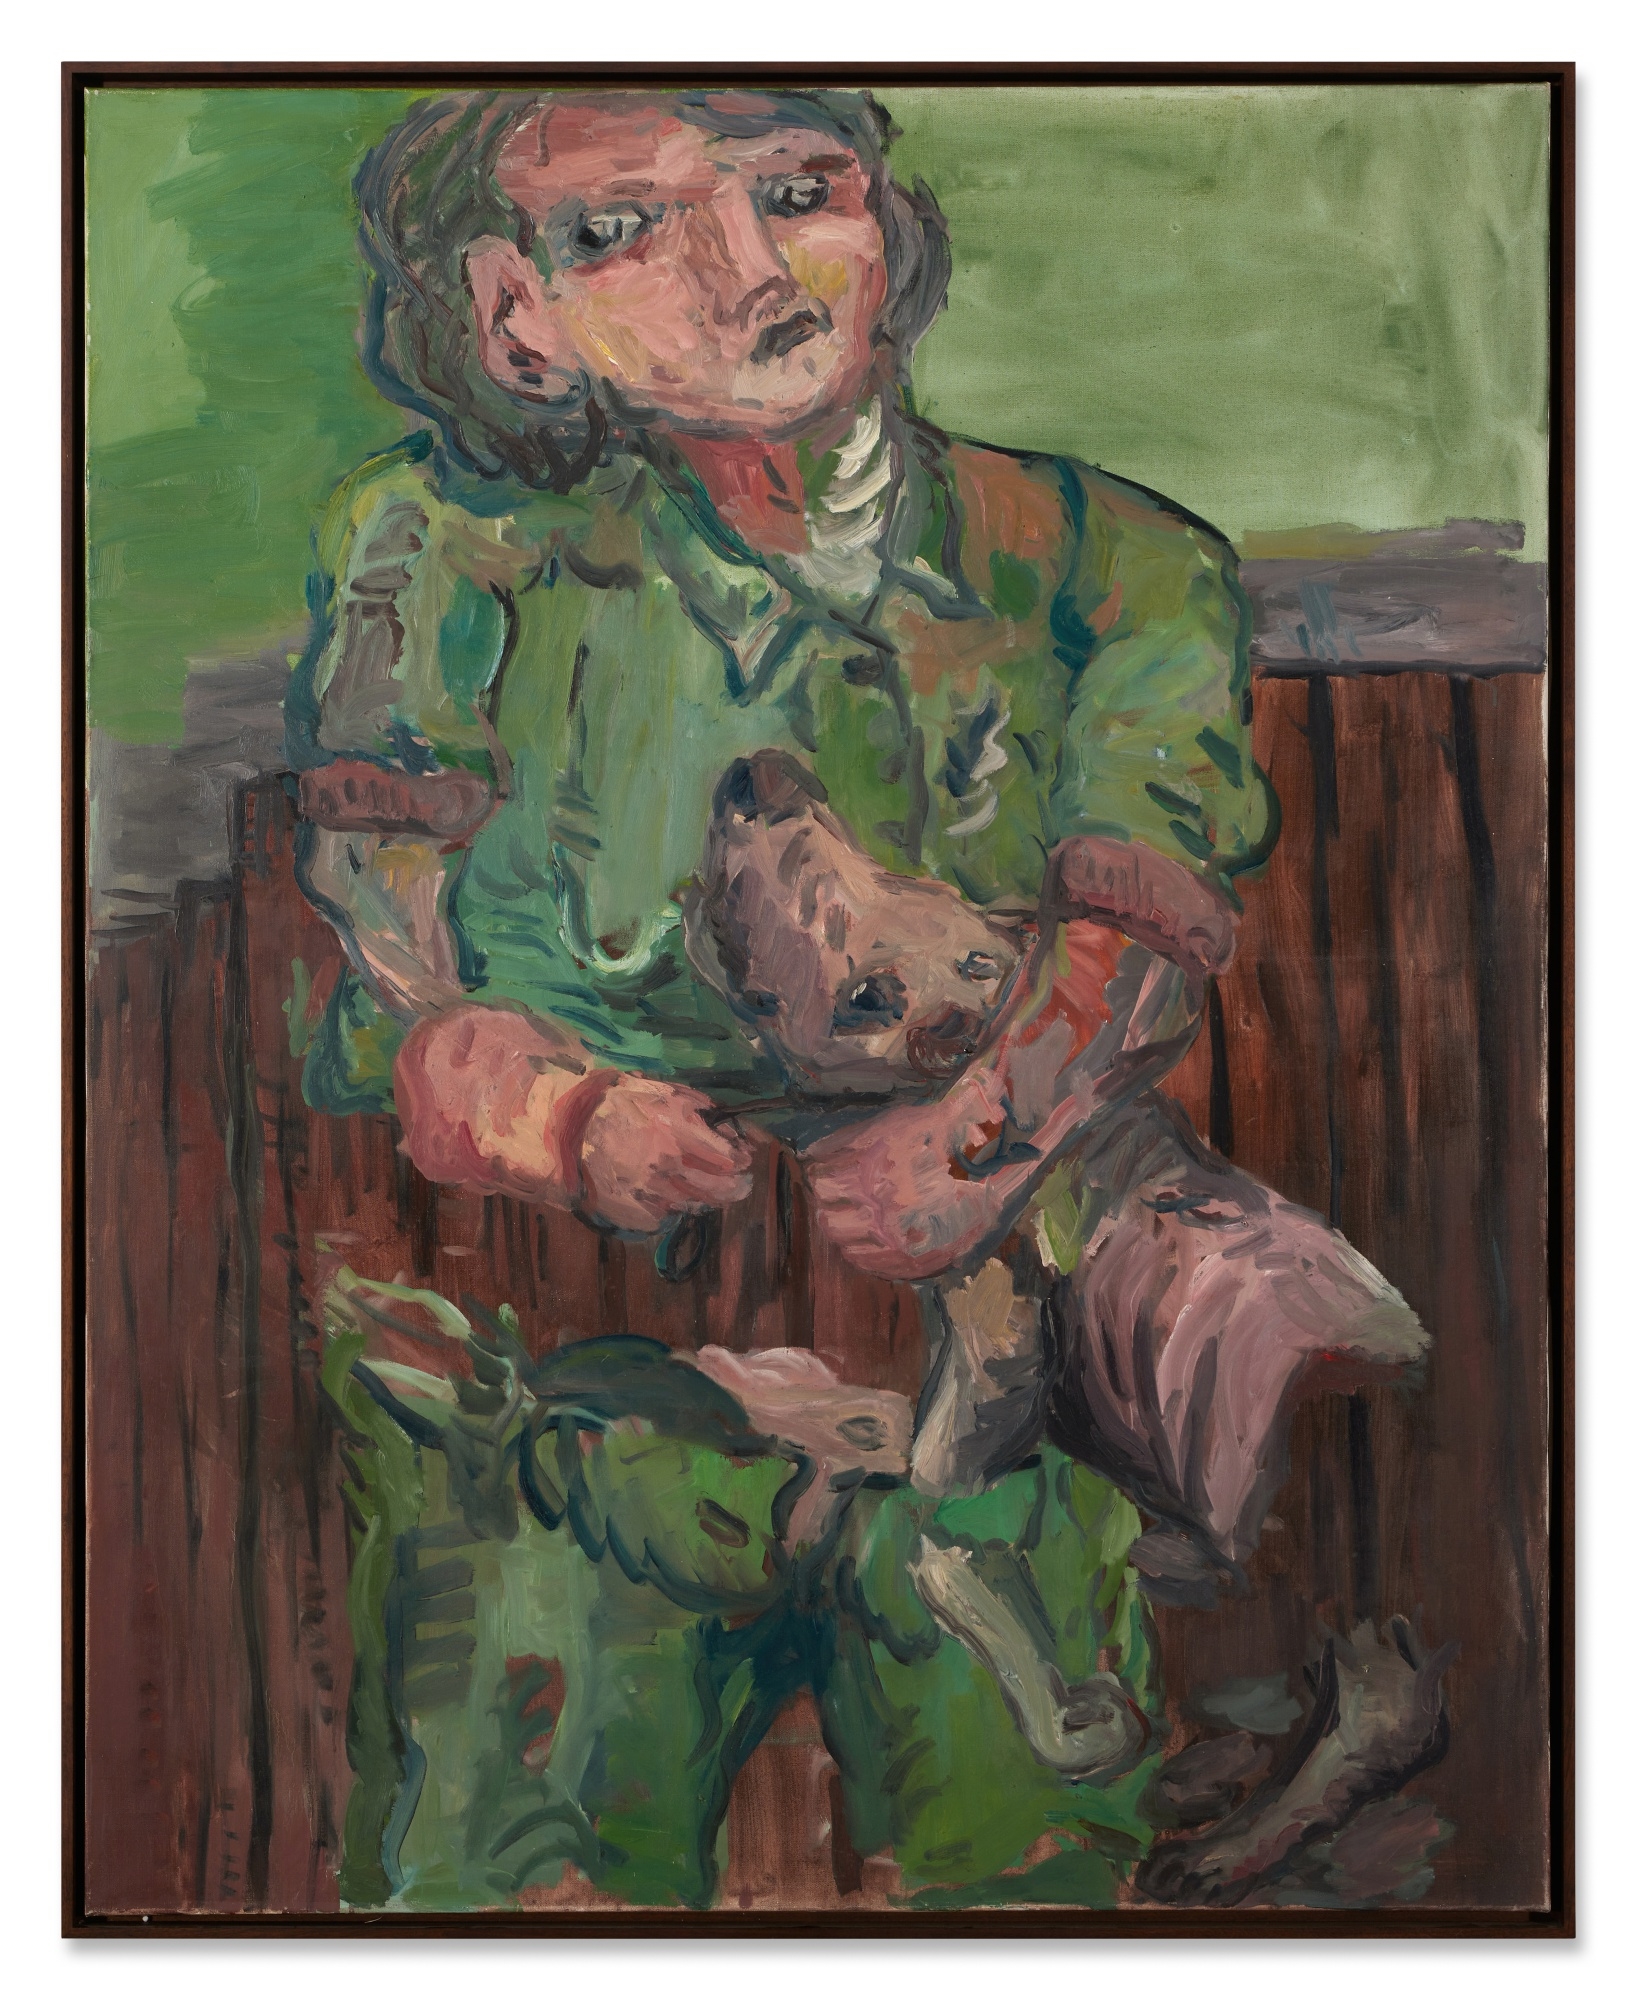 Malermund (Painter’s Mouth) by Georg Baselitz, dated 1966